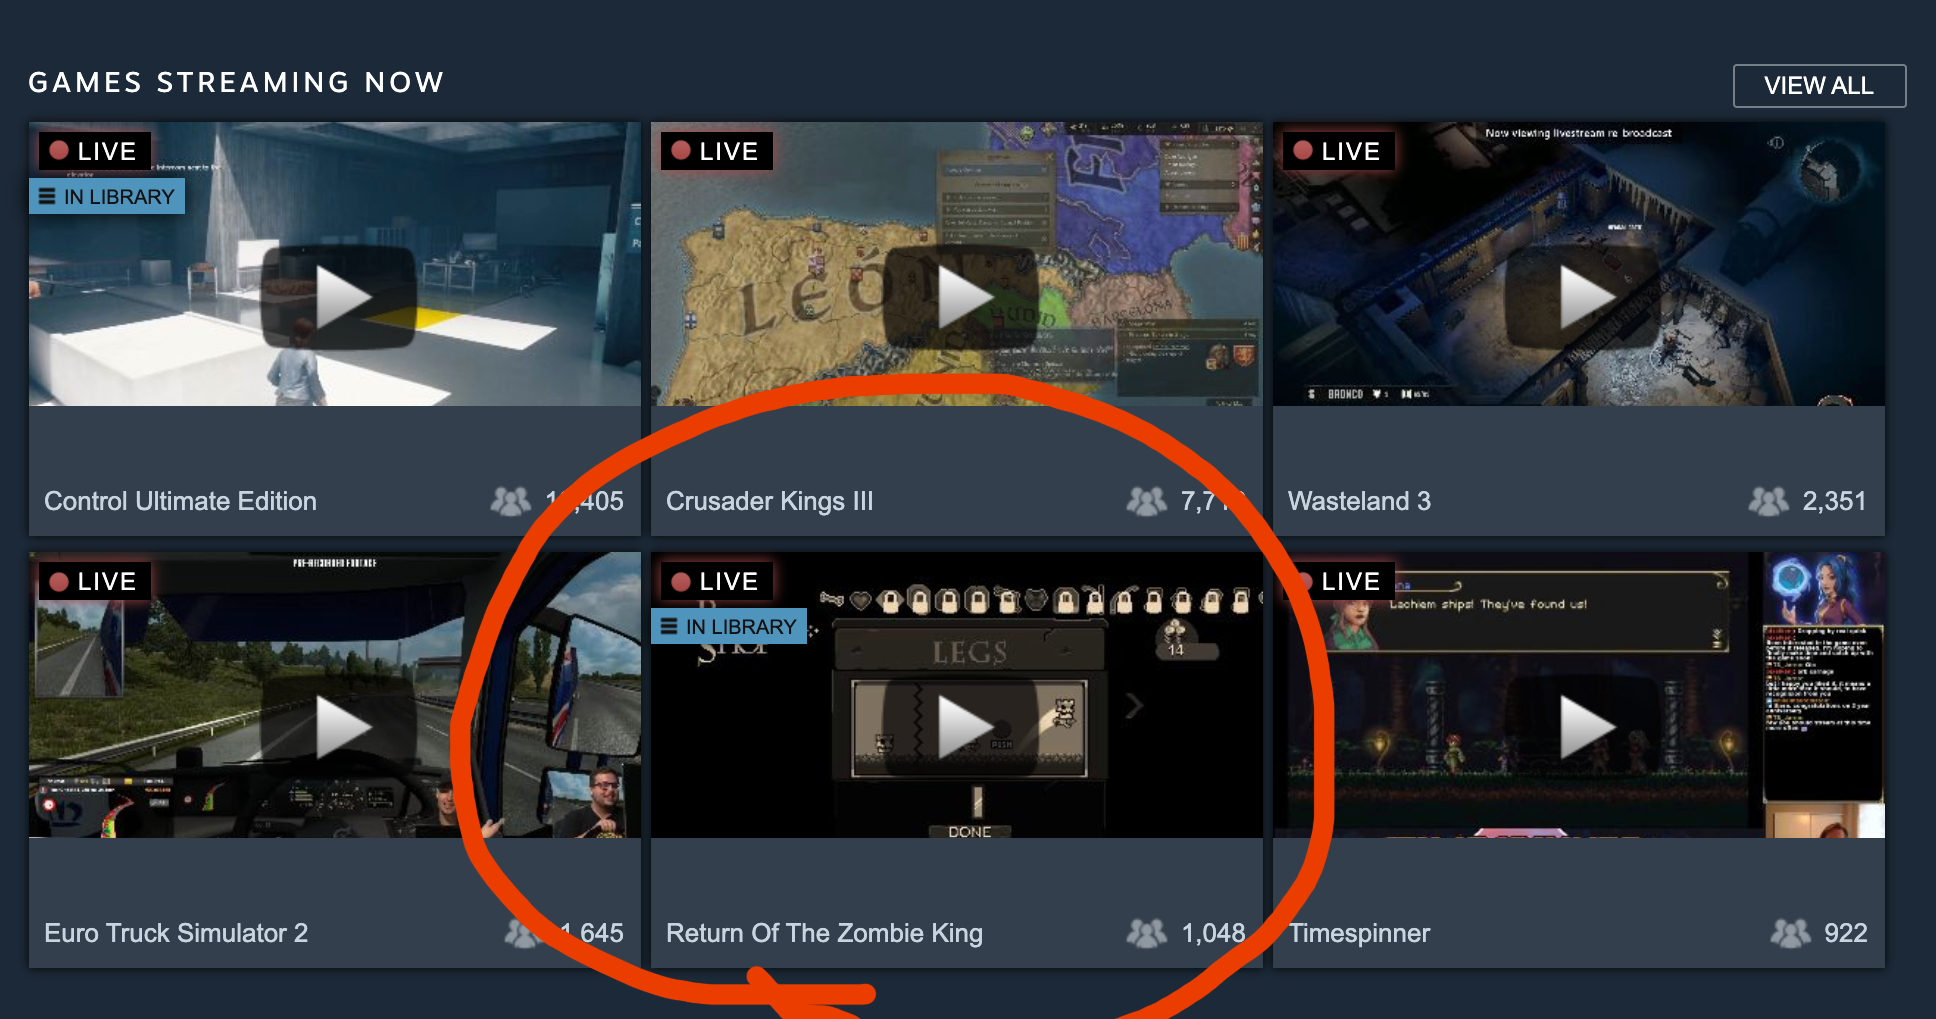 What is a Steam Store Broadcast?